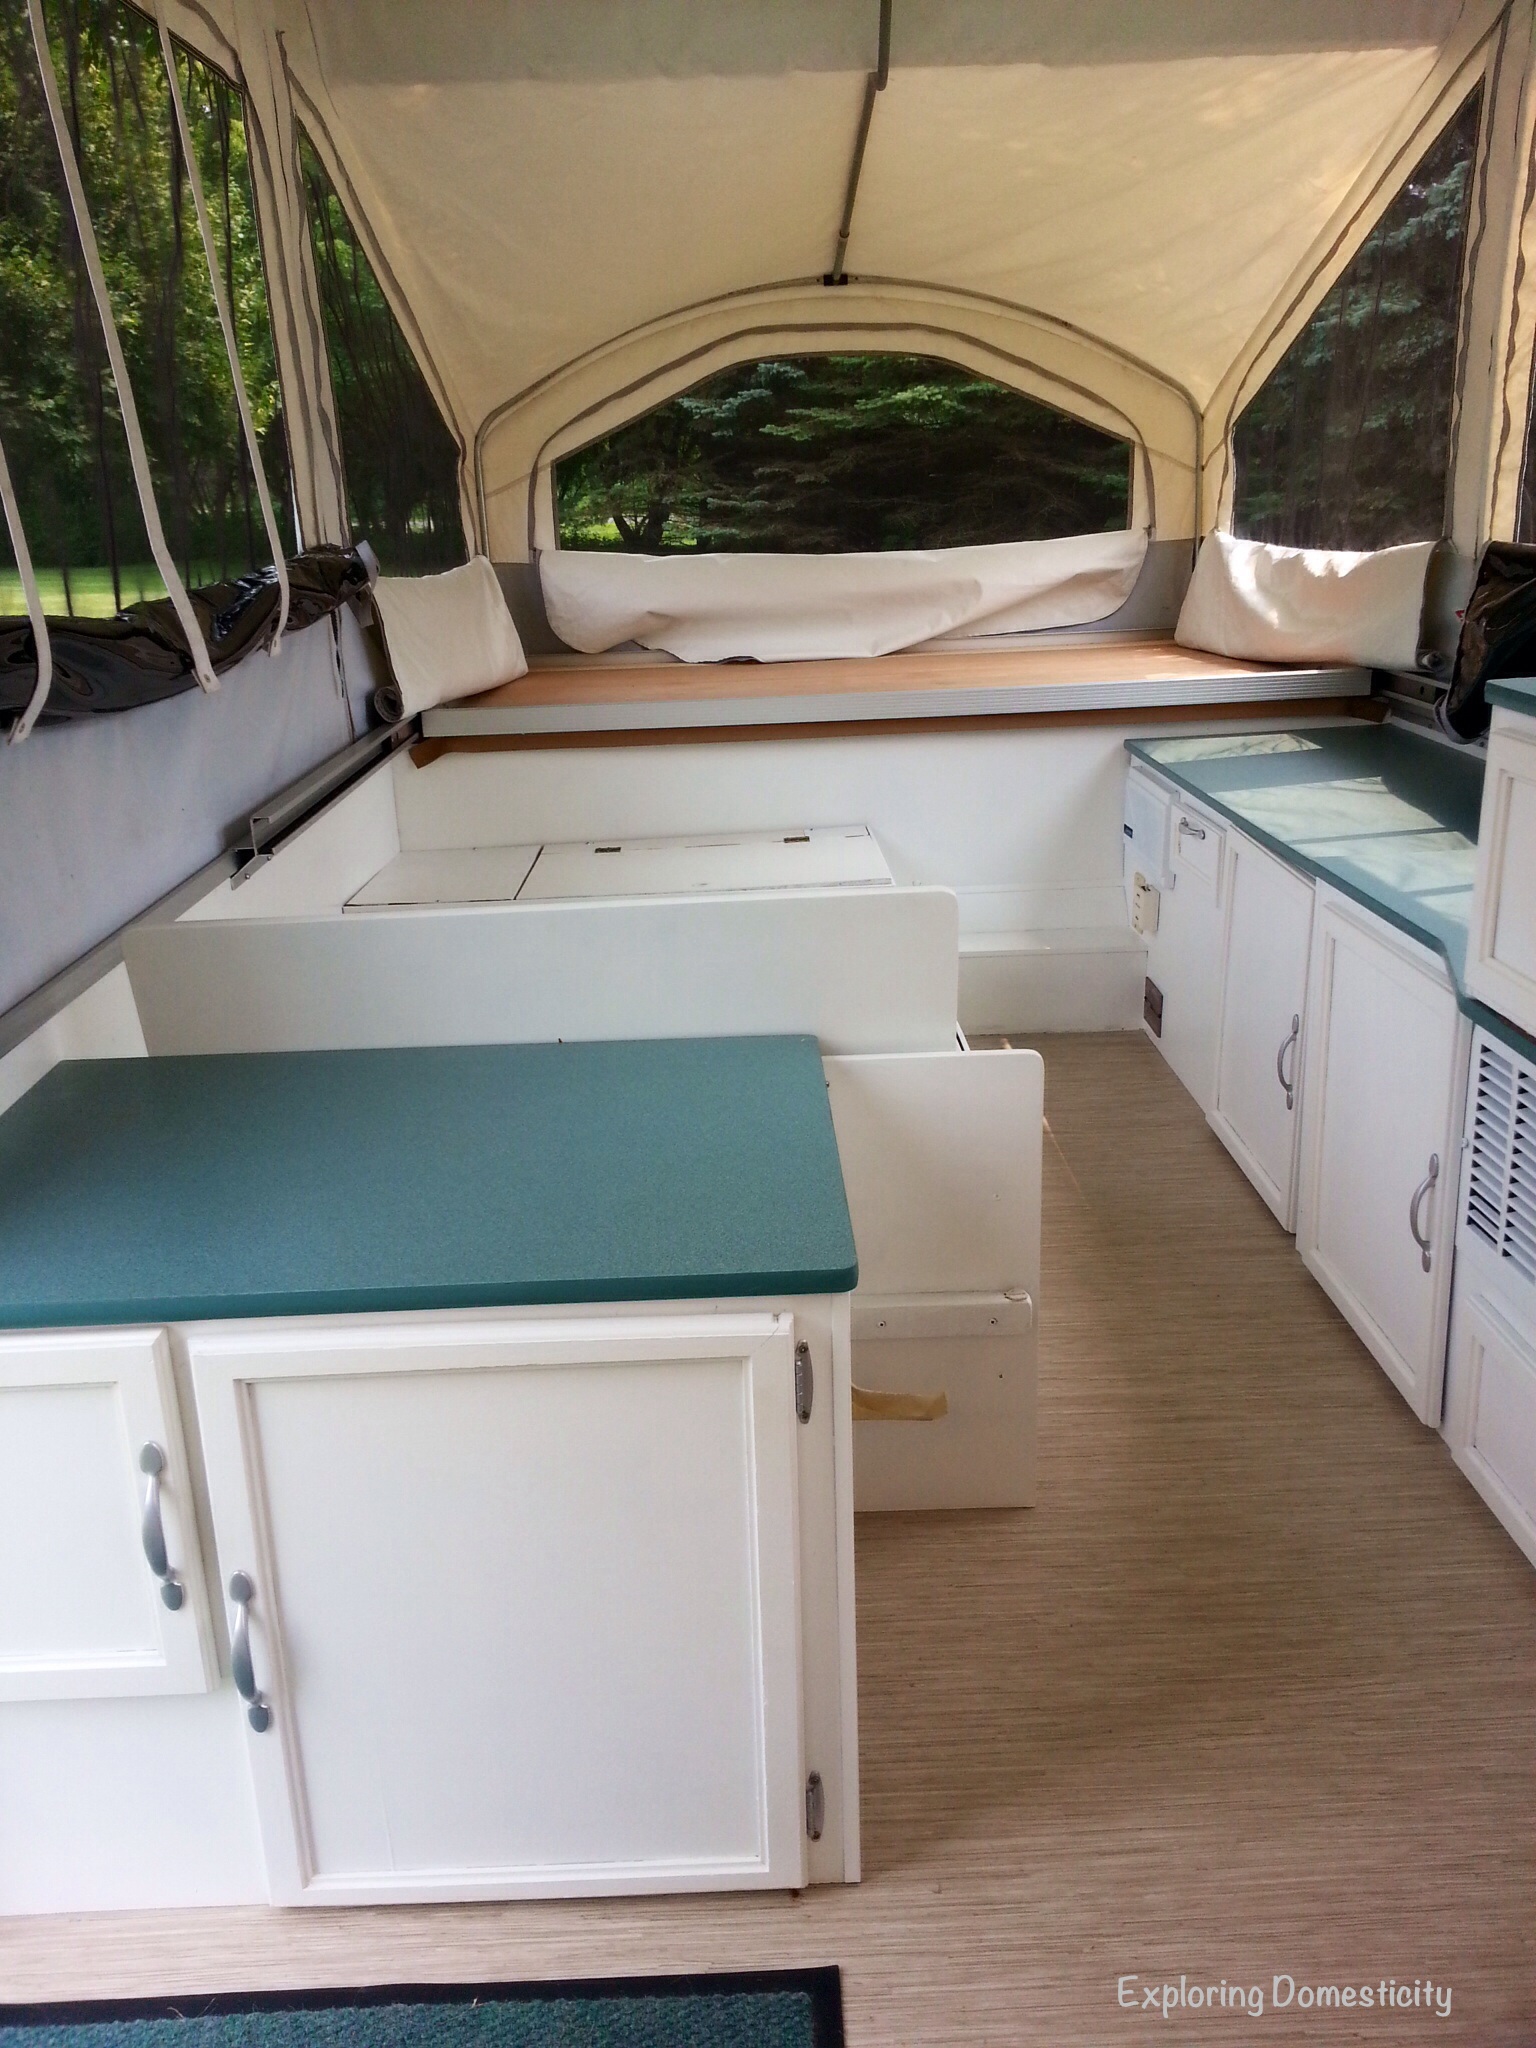 Pop Up Camper Remodel Painting And Flooring Exploring